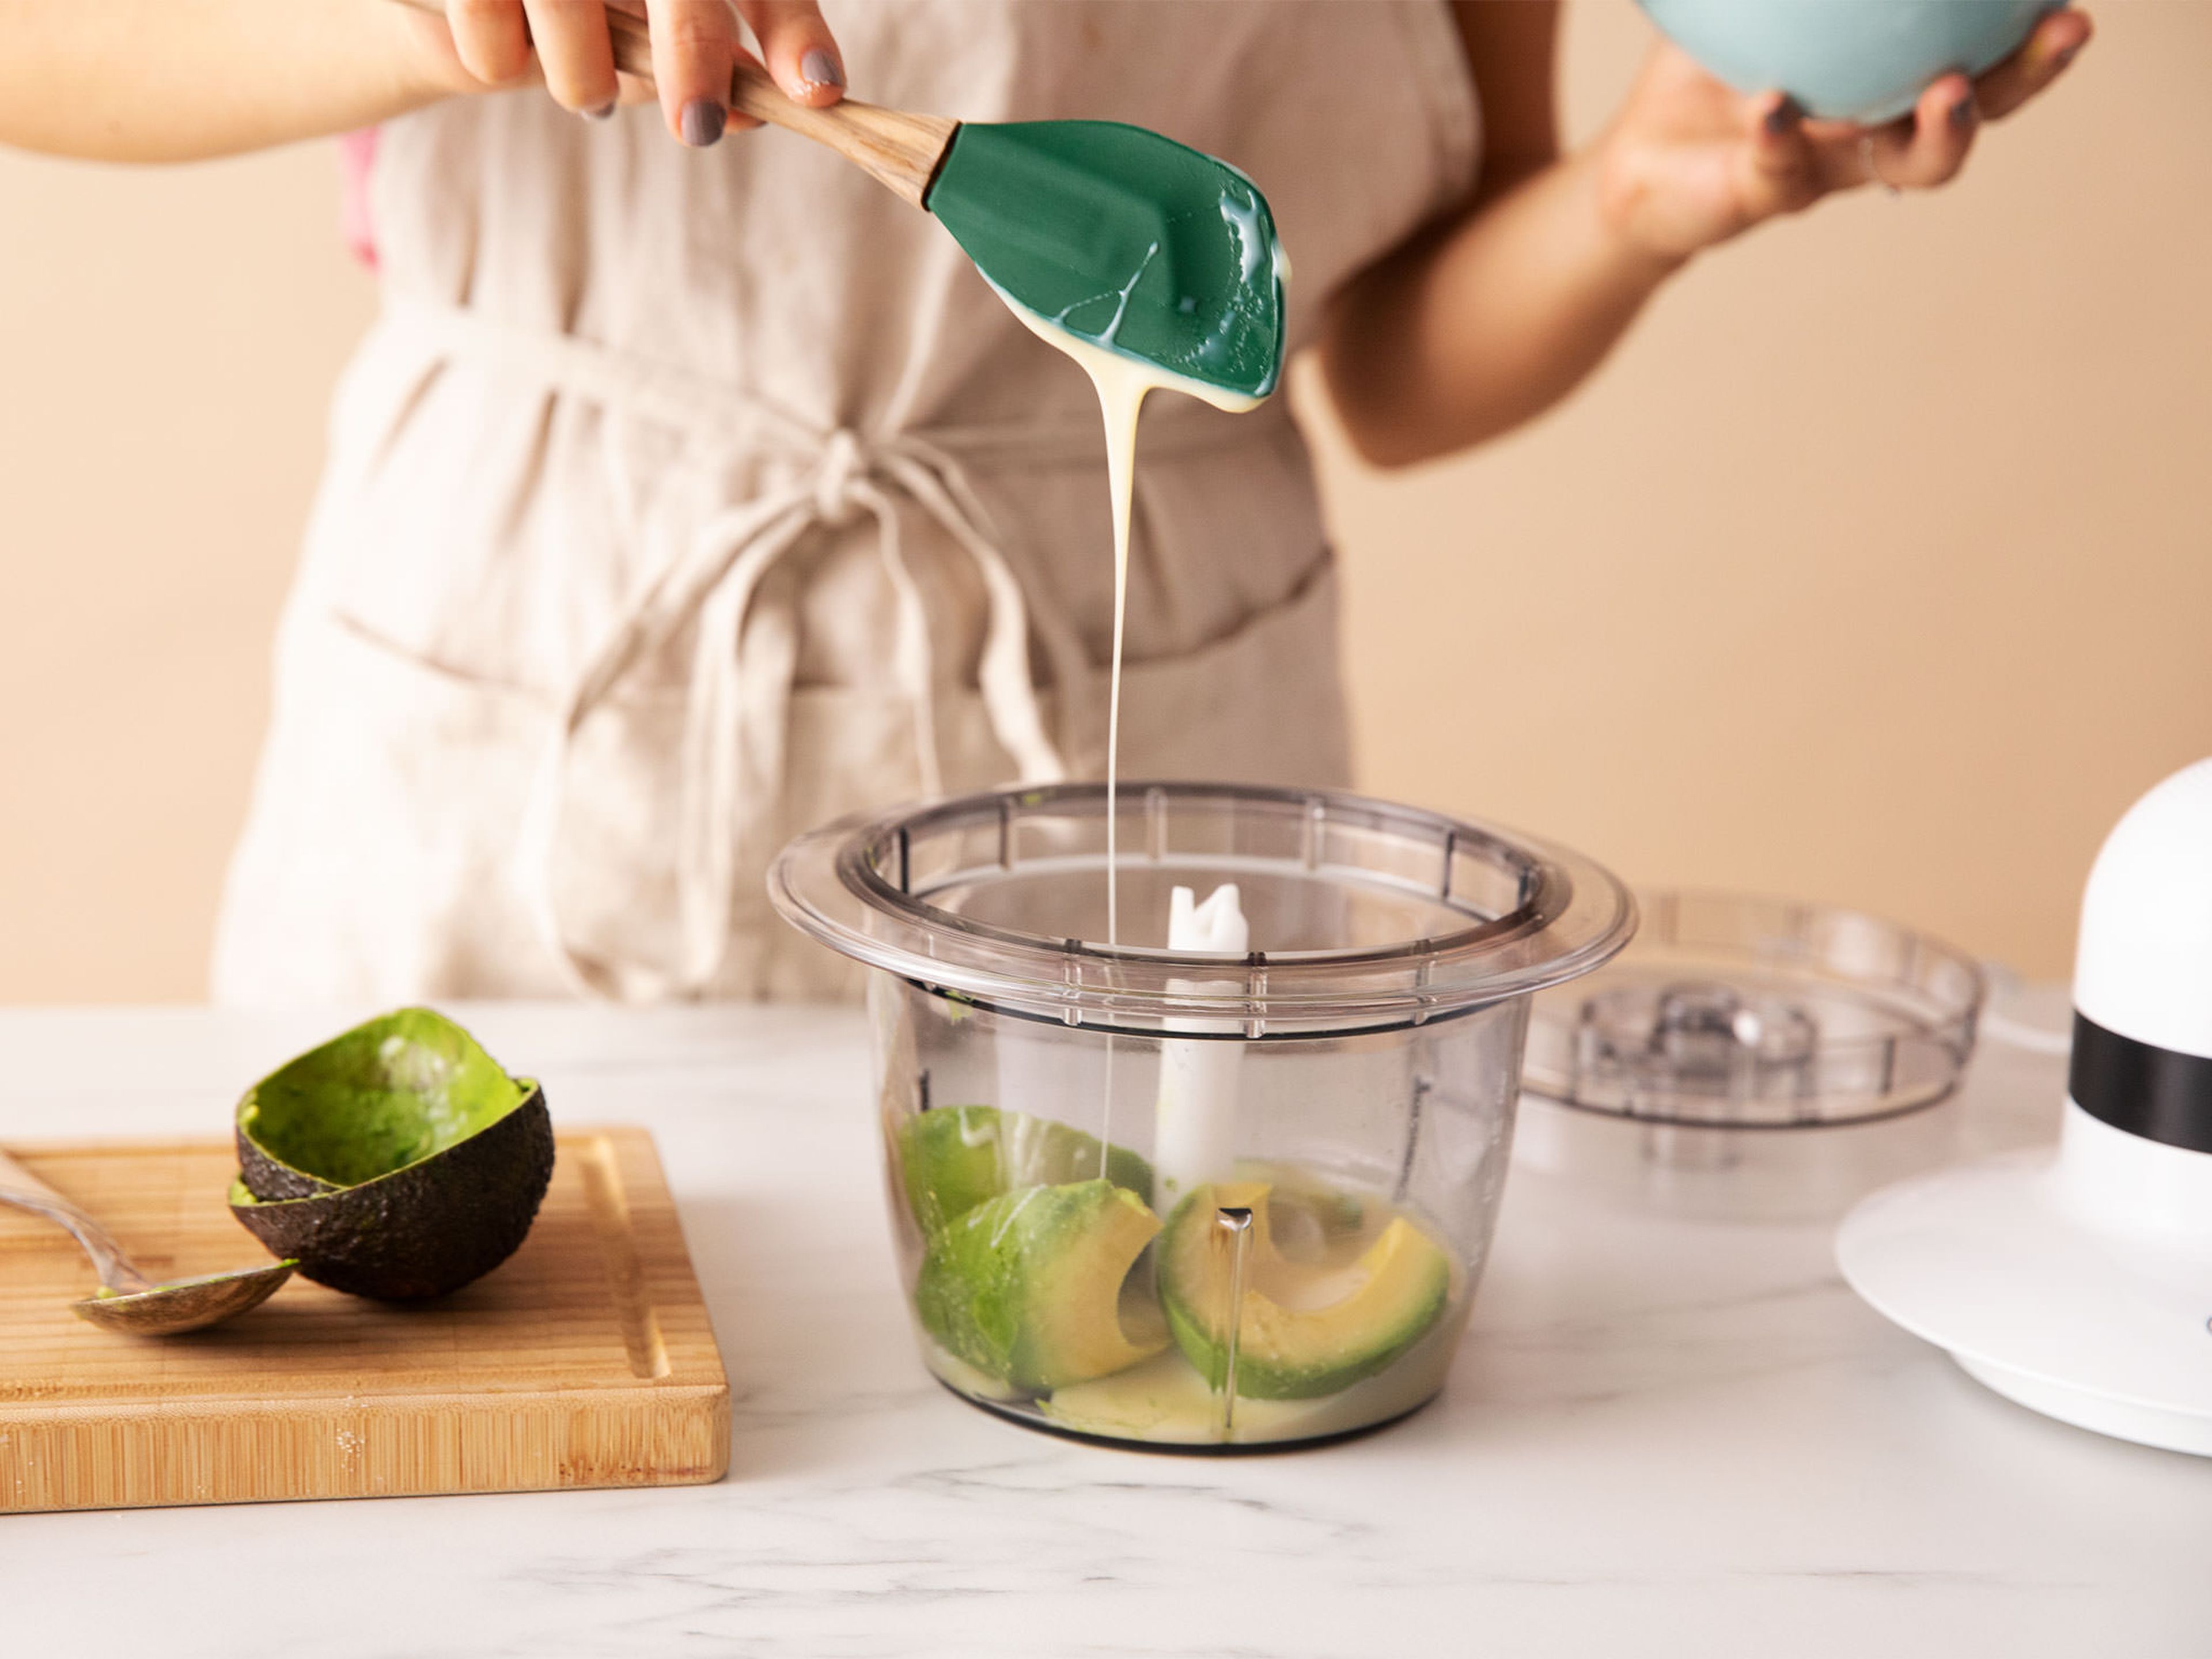 Blend avocado and sweetened condensed milk in a food processor with a pinch of salt. Whip heavy cream to stiff peaks in a cold bowl using a hand mixer.